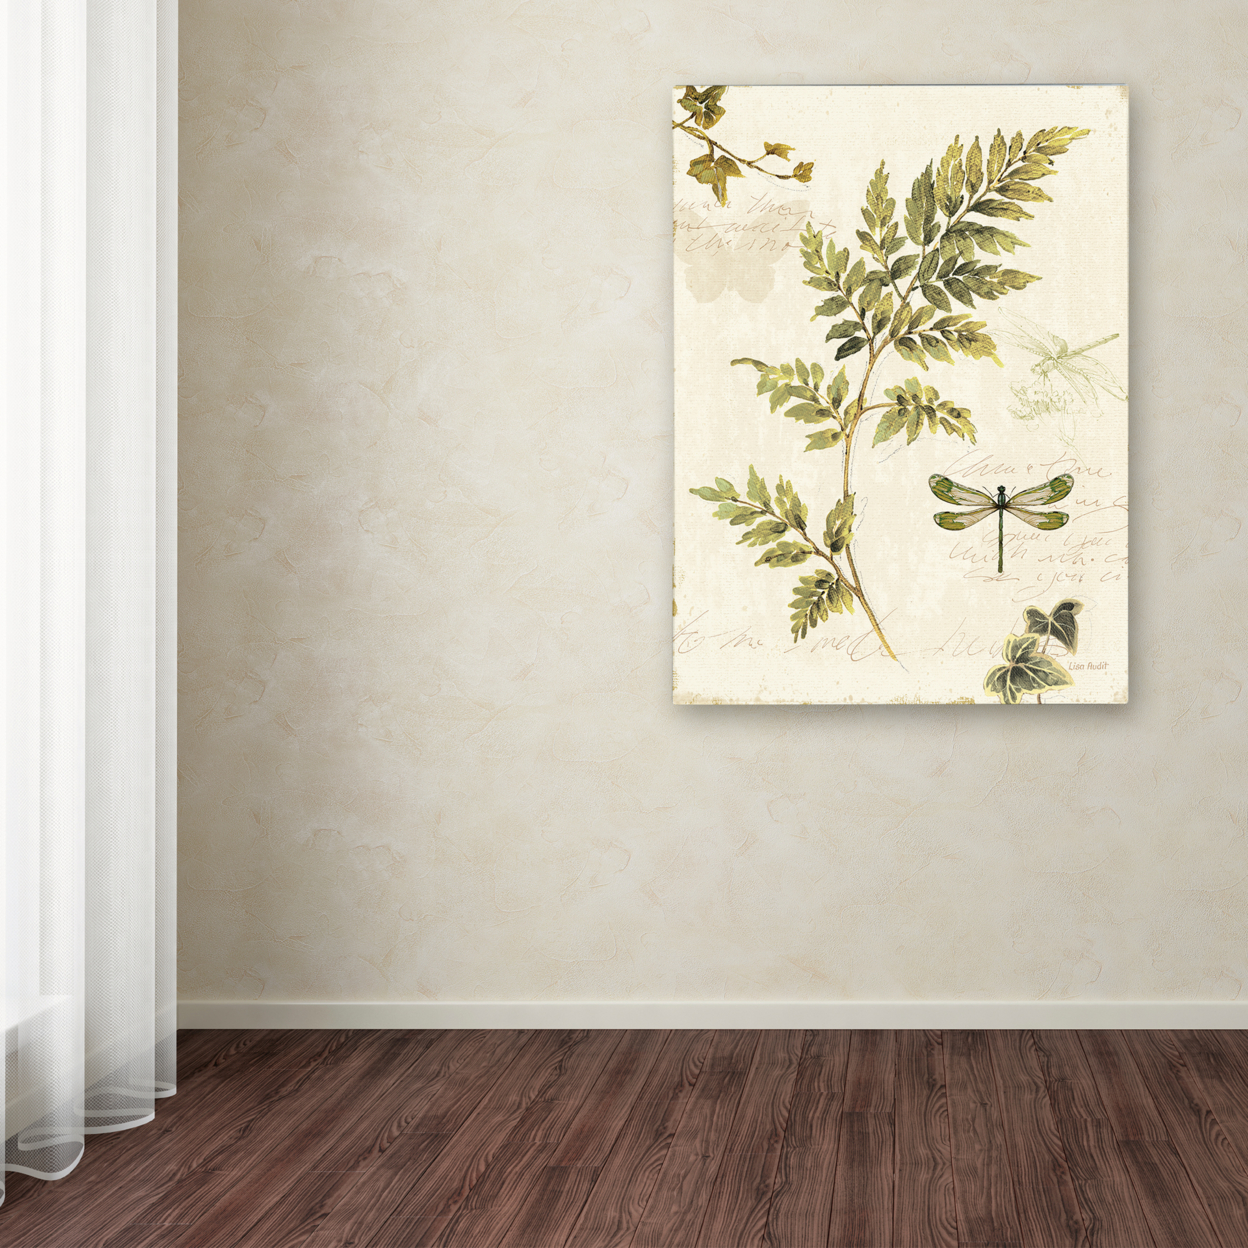 Lisa Audit 'Ivies And Ferns III' Canvas Wall Art 35 X 47 Inches